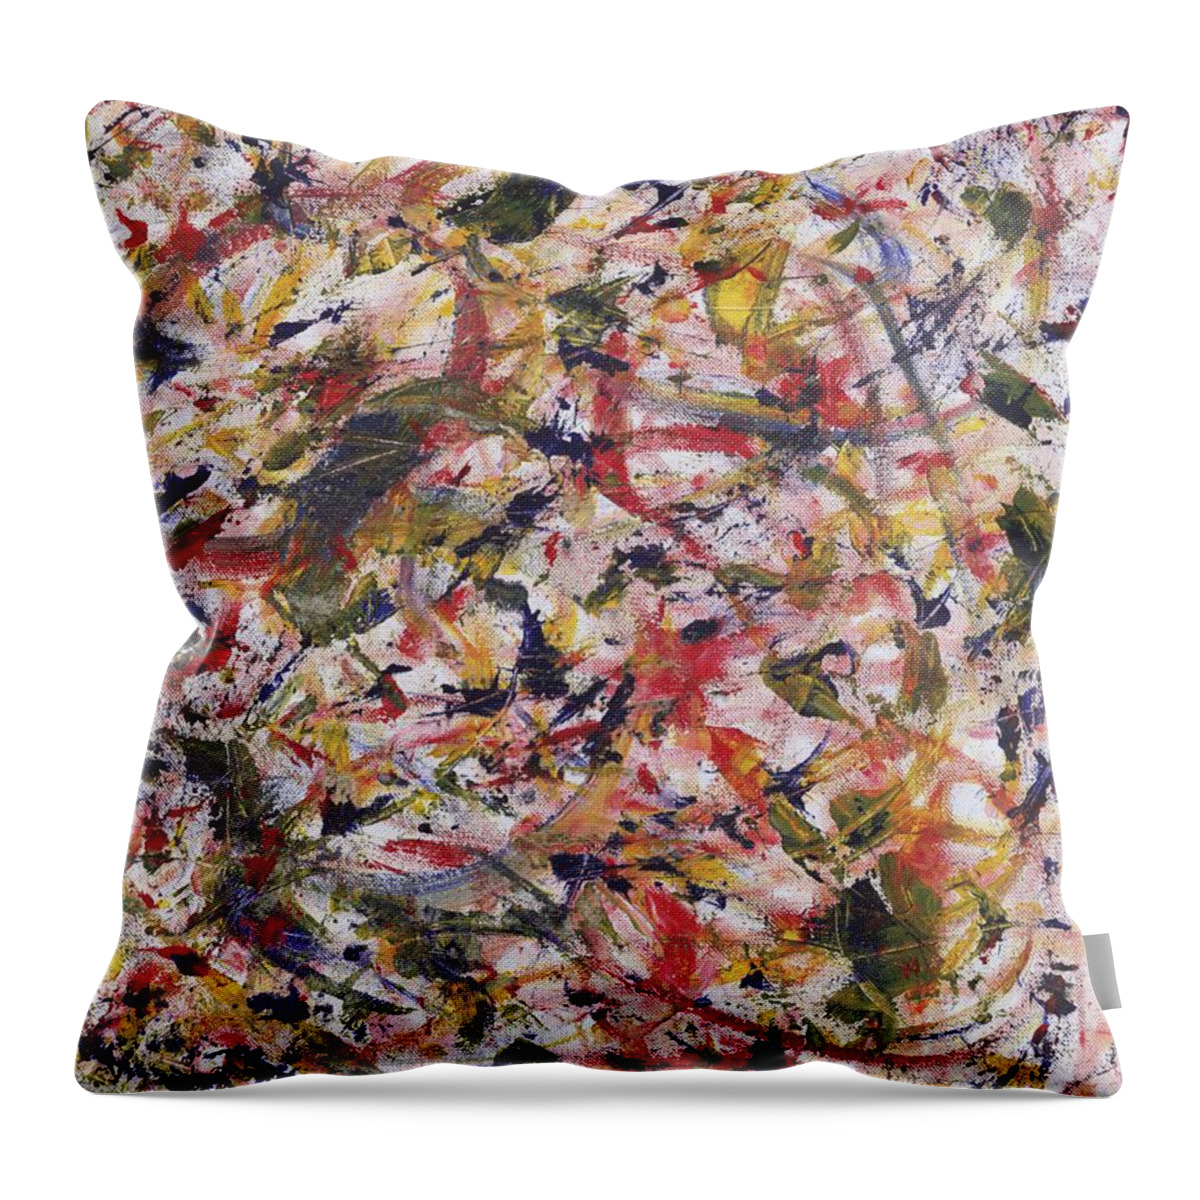 Abstract Expression Throw Pillow featuring the painting Let It Go - Panel 3 of Triptych by Angela Bushman